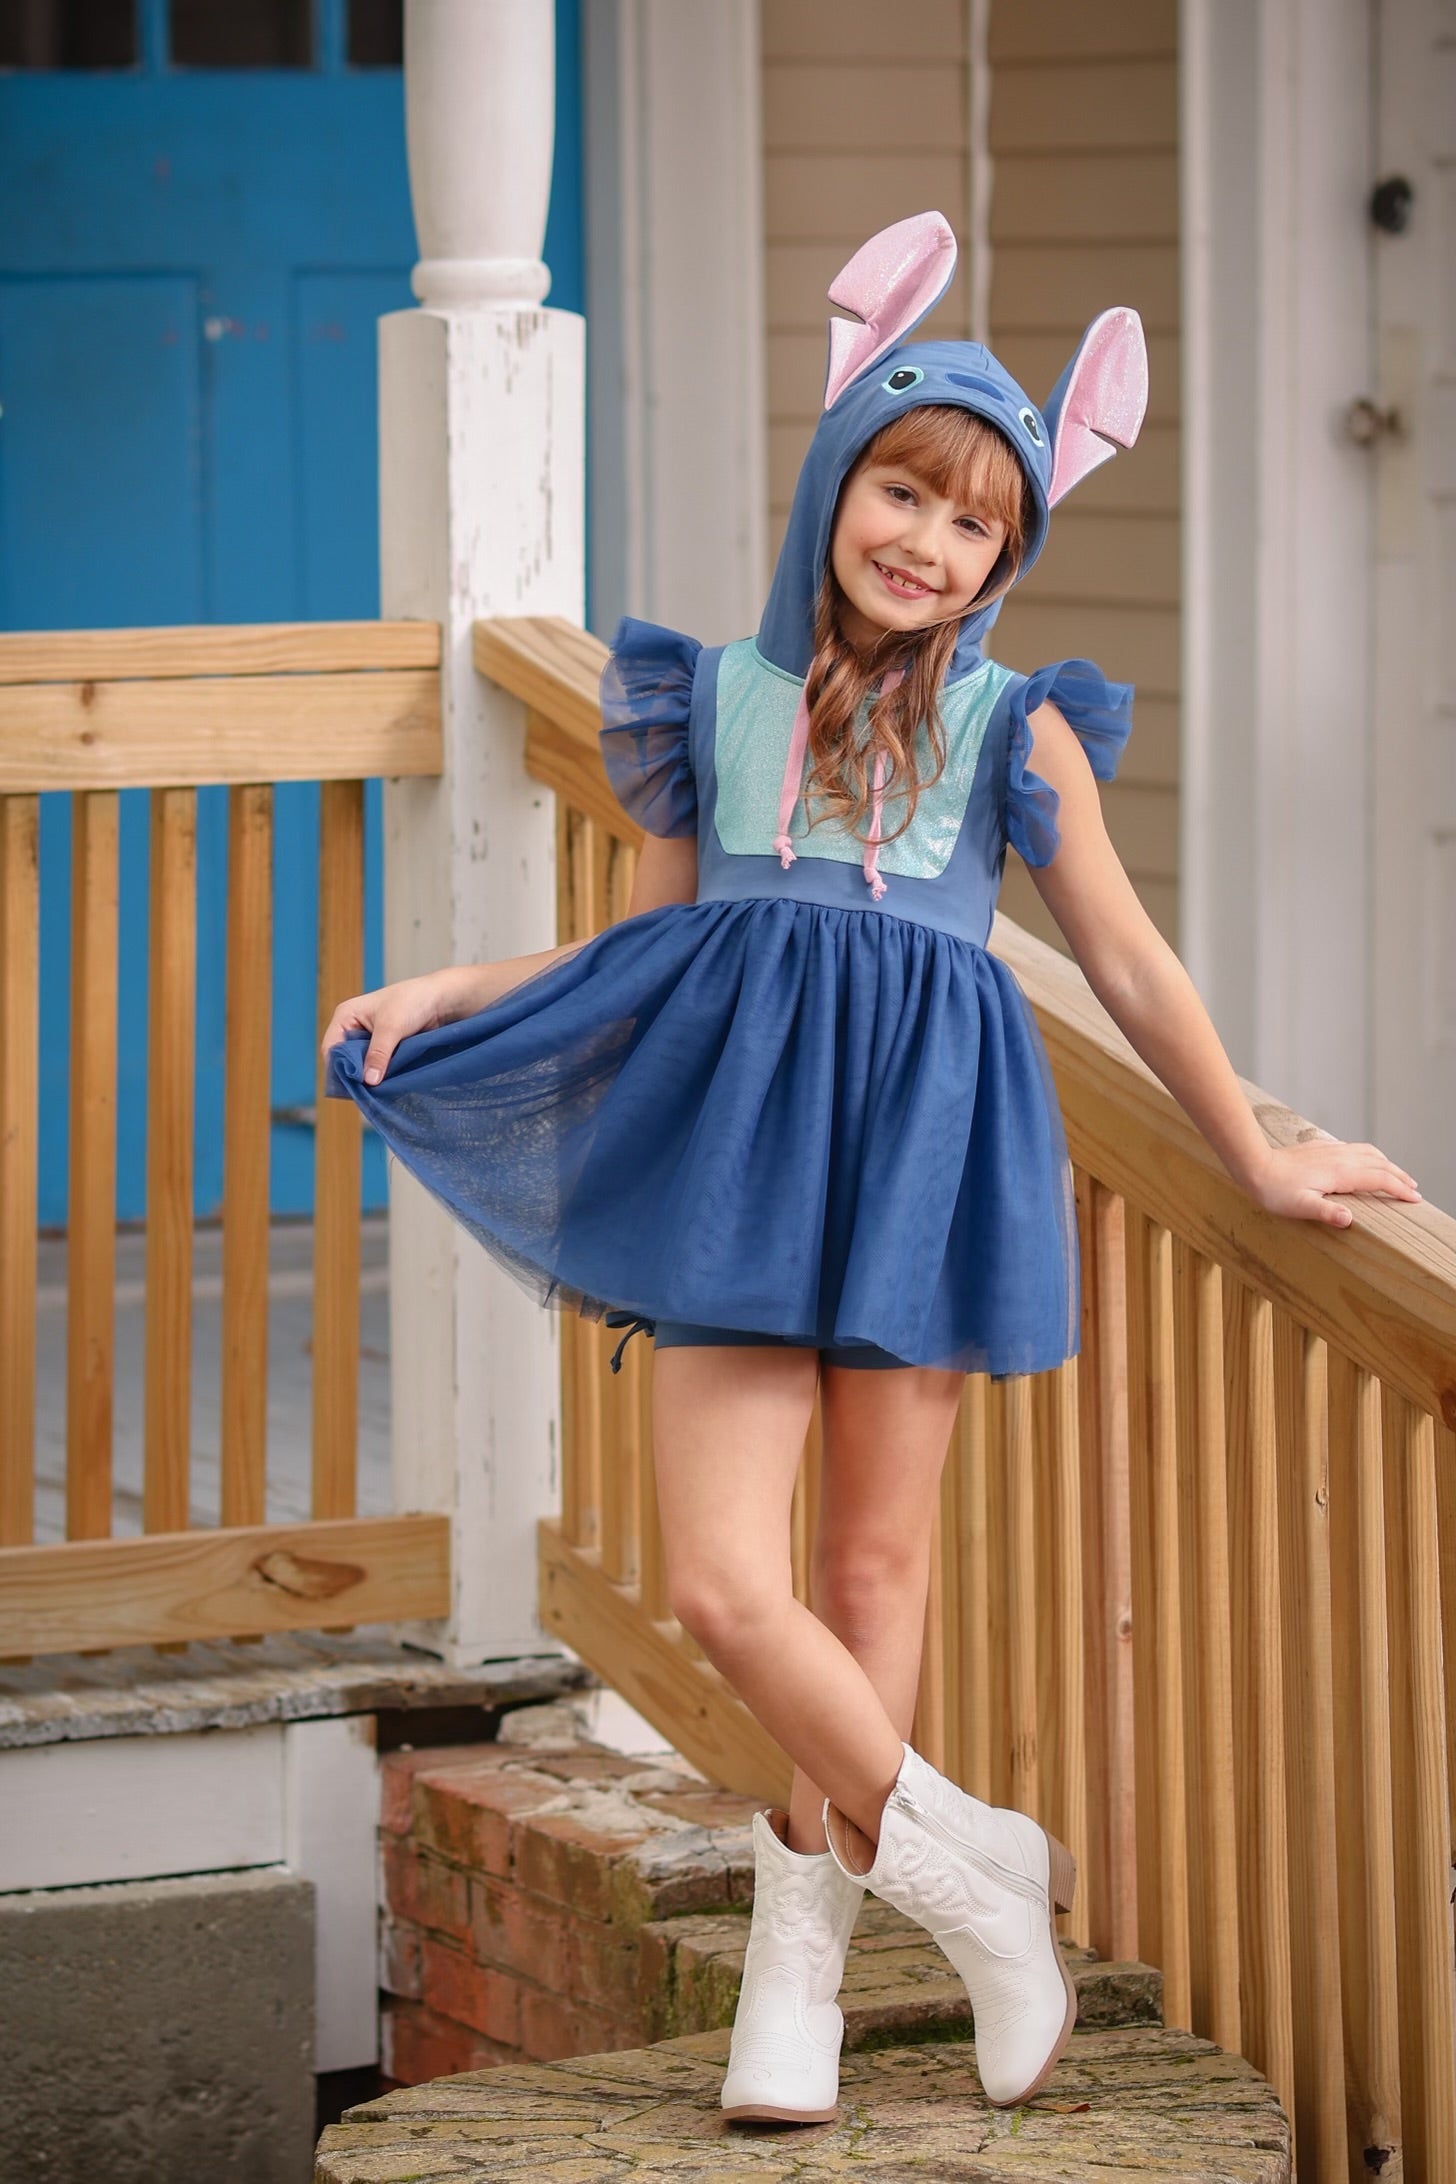 PRE-ORDER - Experimental Dreamer Blue and Ice Blue Hooded Tulle Overlay Couture Length Dress with Shortie Pre-Order